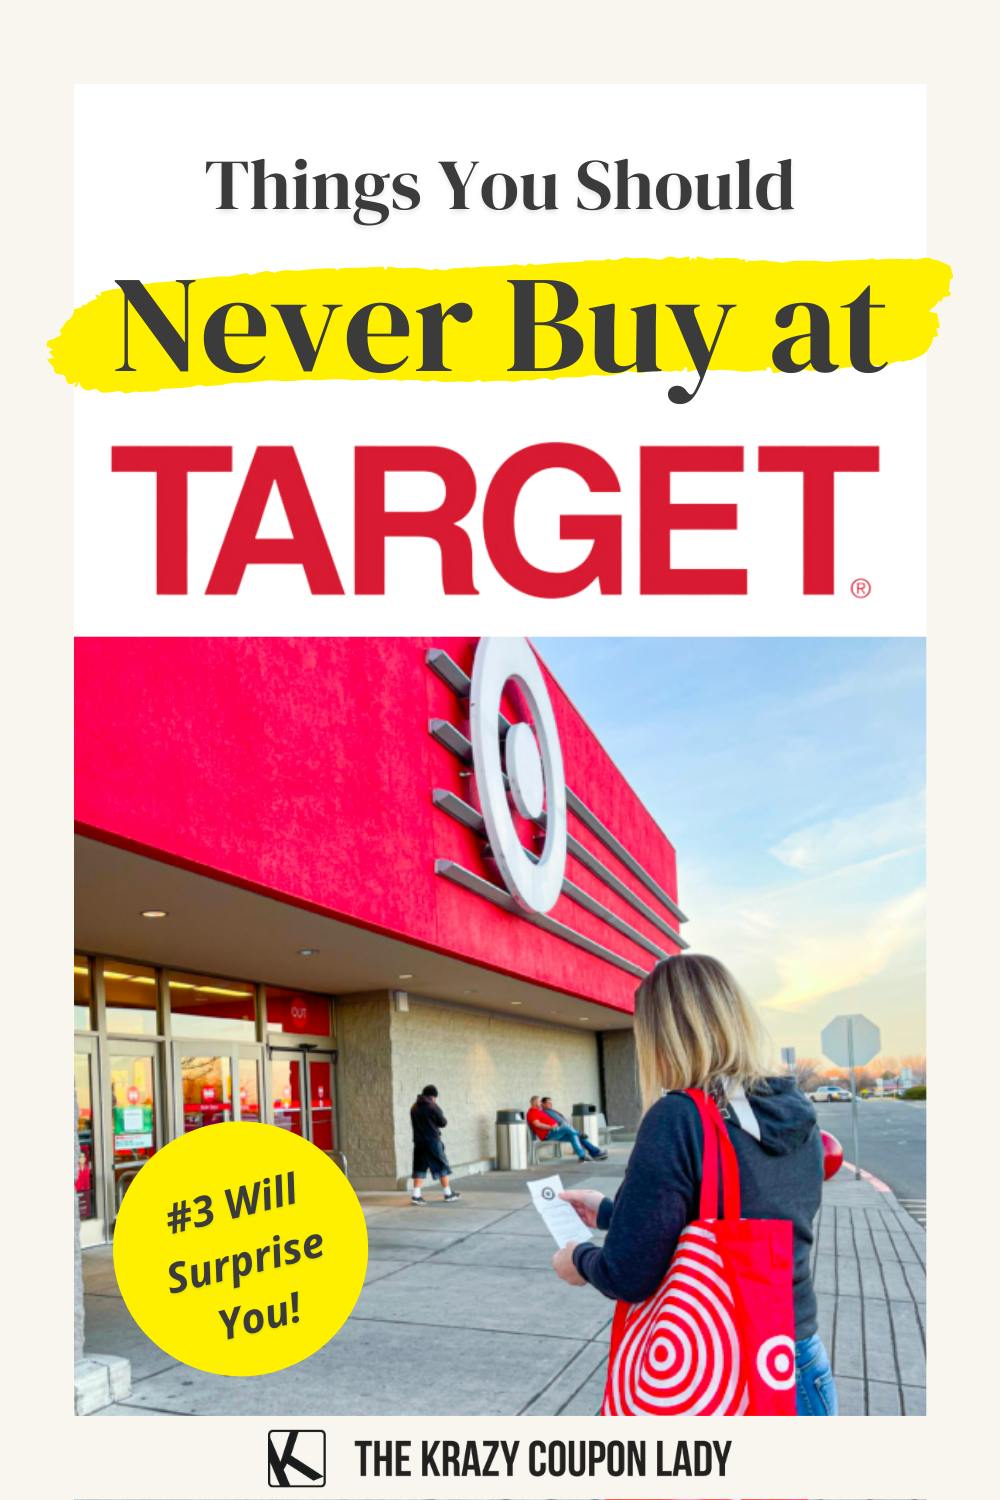 What to Buy at Target? Not These 5 Things